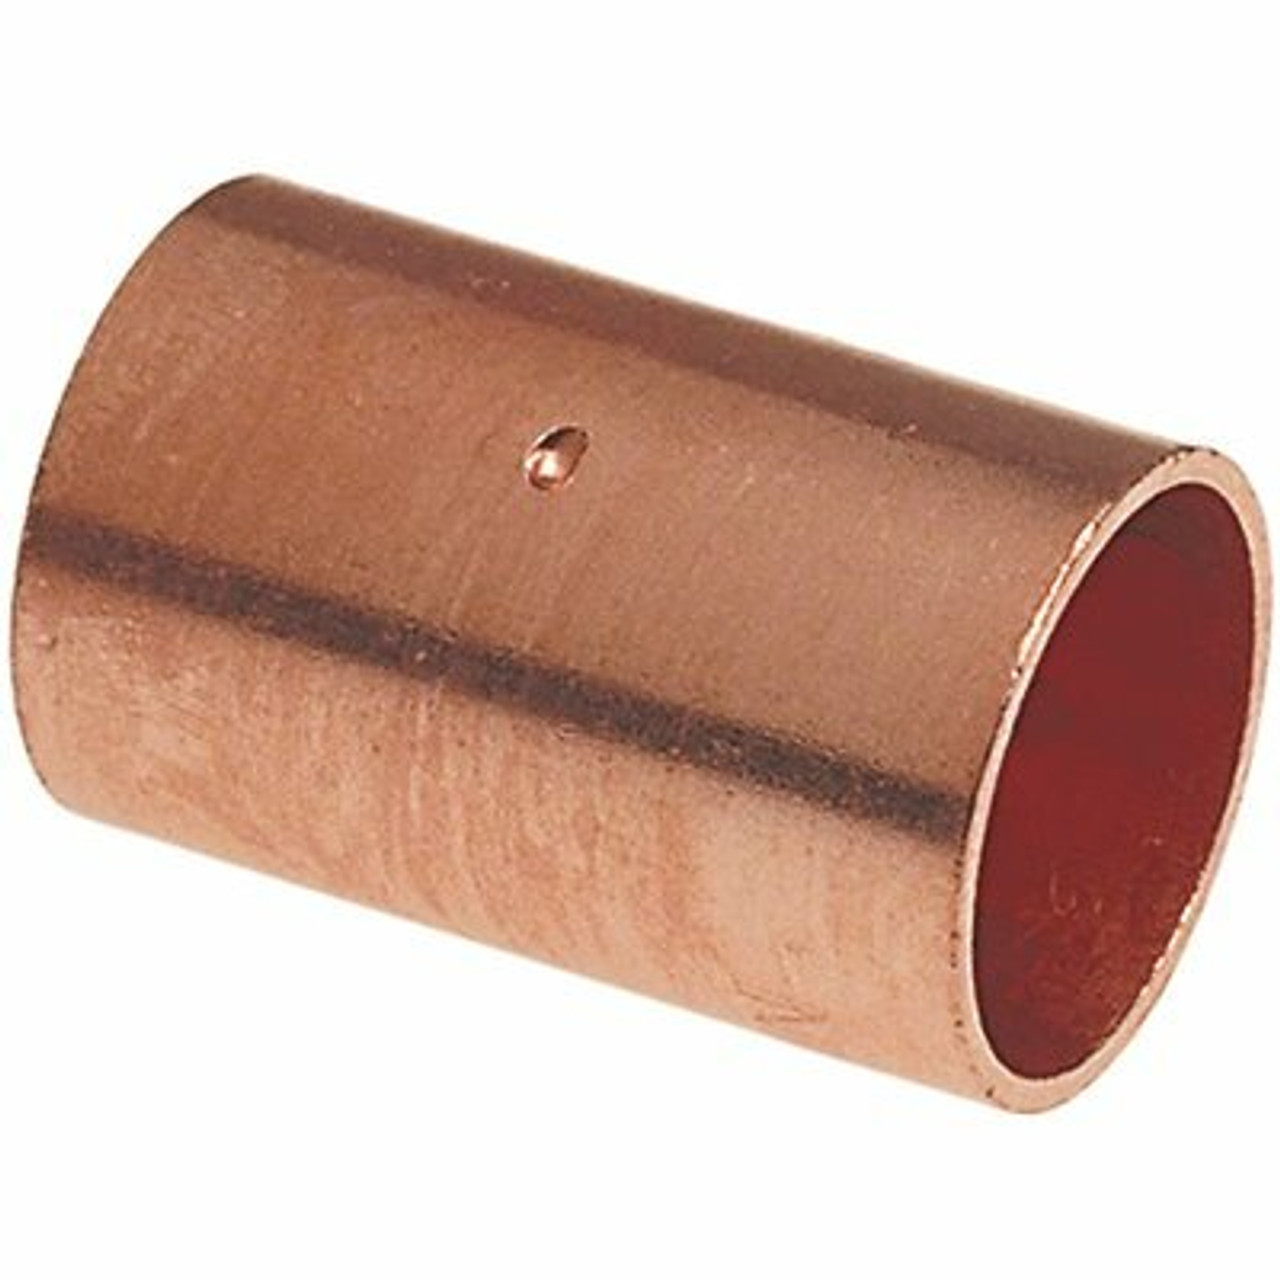 Nibco 1-1/2 In. Copper Pressure Cup X Cup Coupling With Stop Fitting